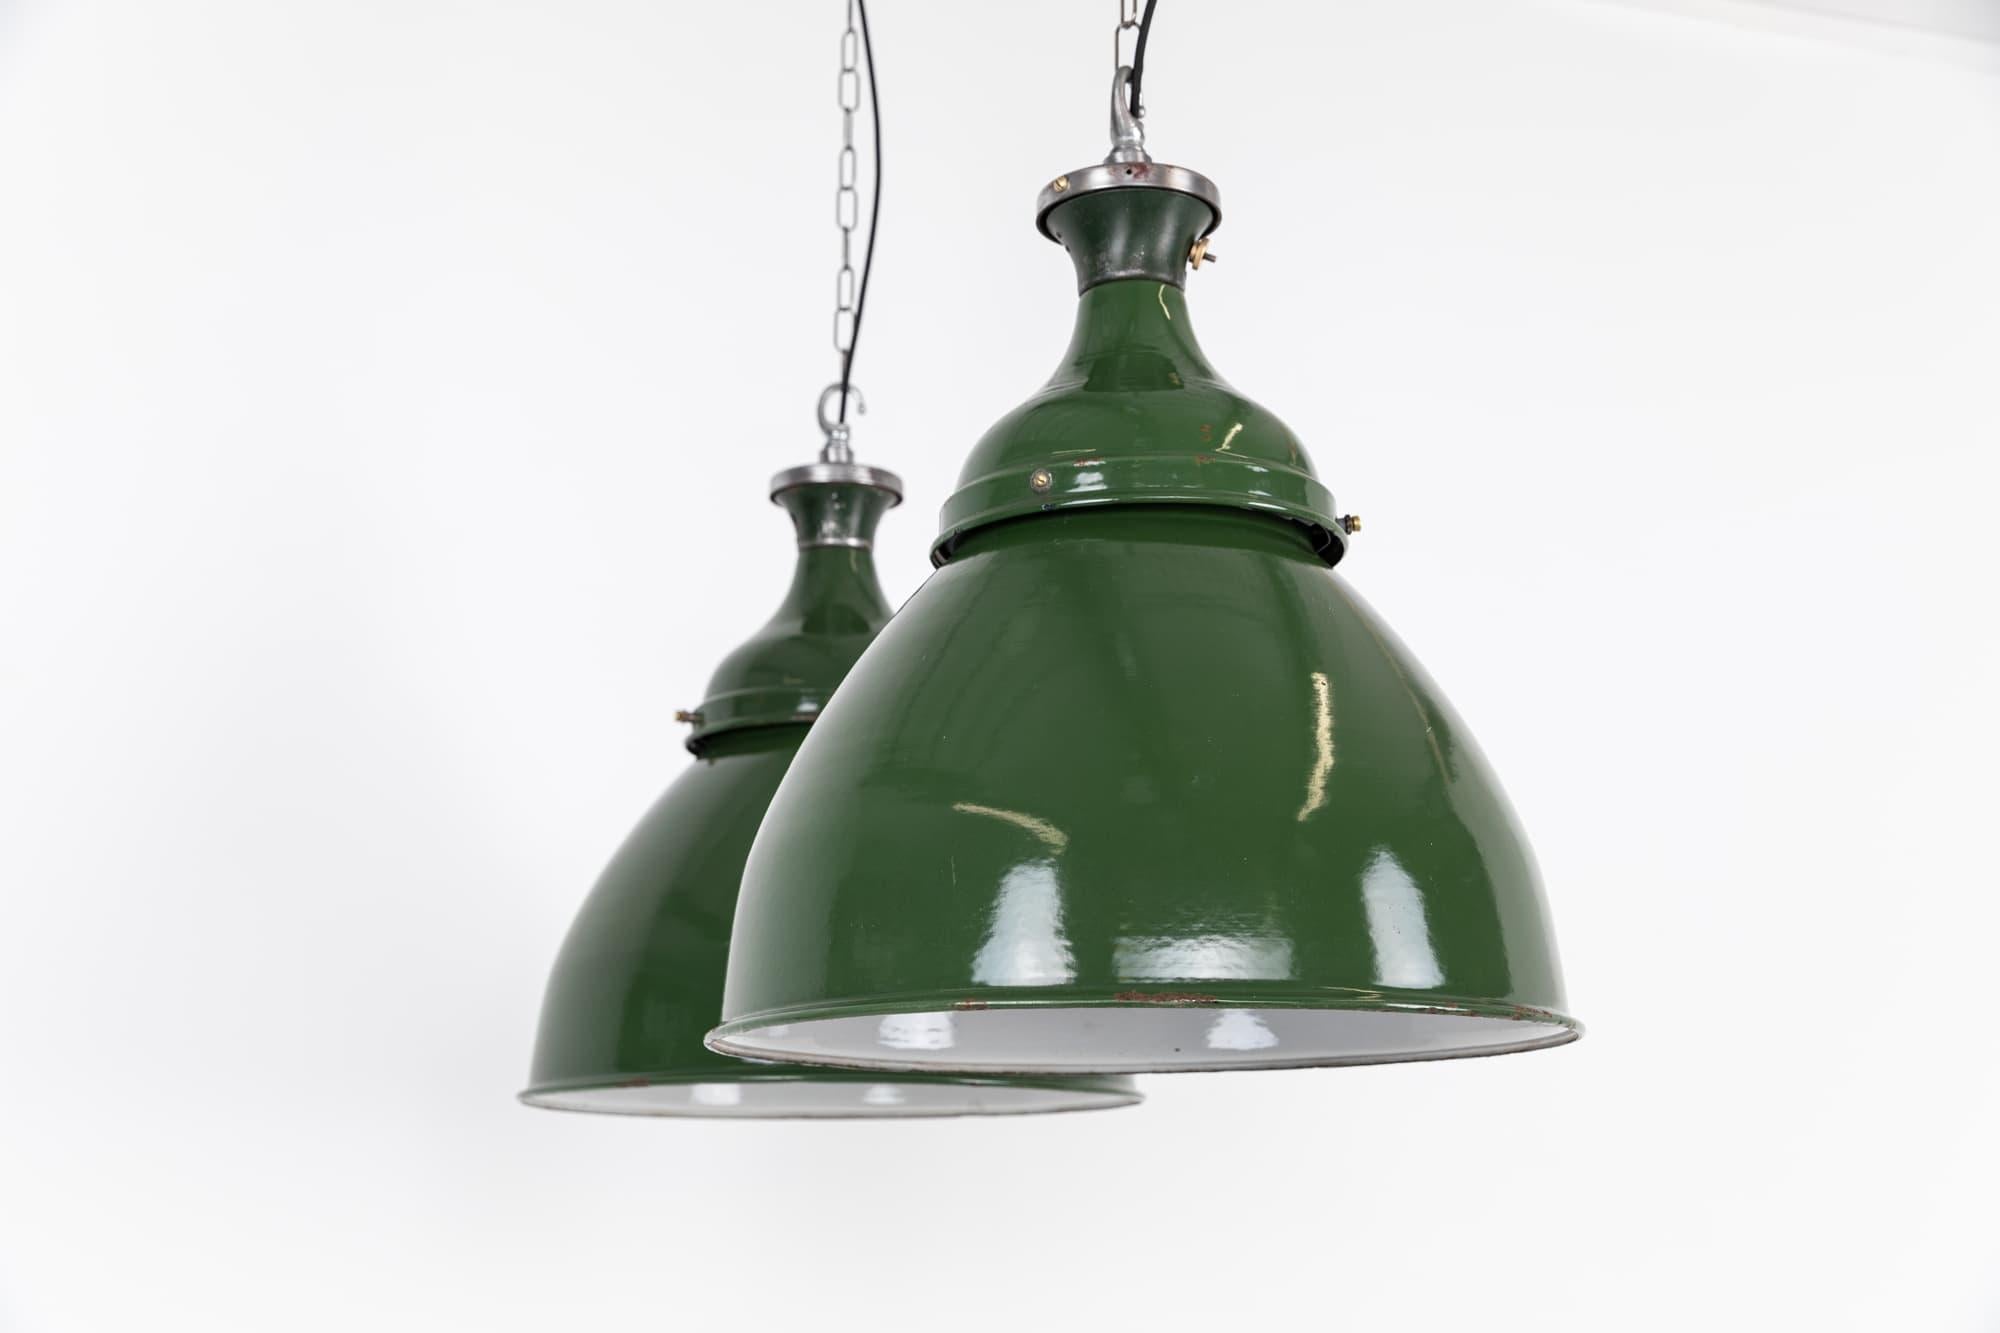 Huge green vitreous enamel pendant lights by renowned industrial manufactures Benjamin Electric. c.1940

In amazing original condition, with very little wear to the enamel. Price is per lamp.

Rewired with 1m of black round flex.
